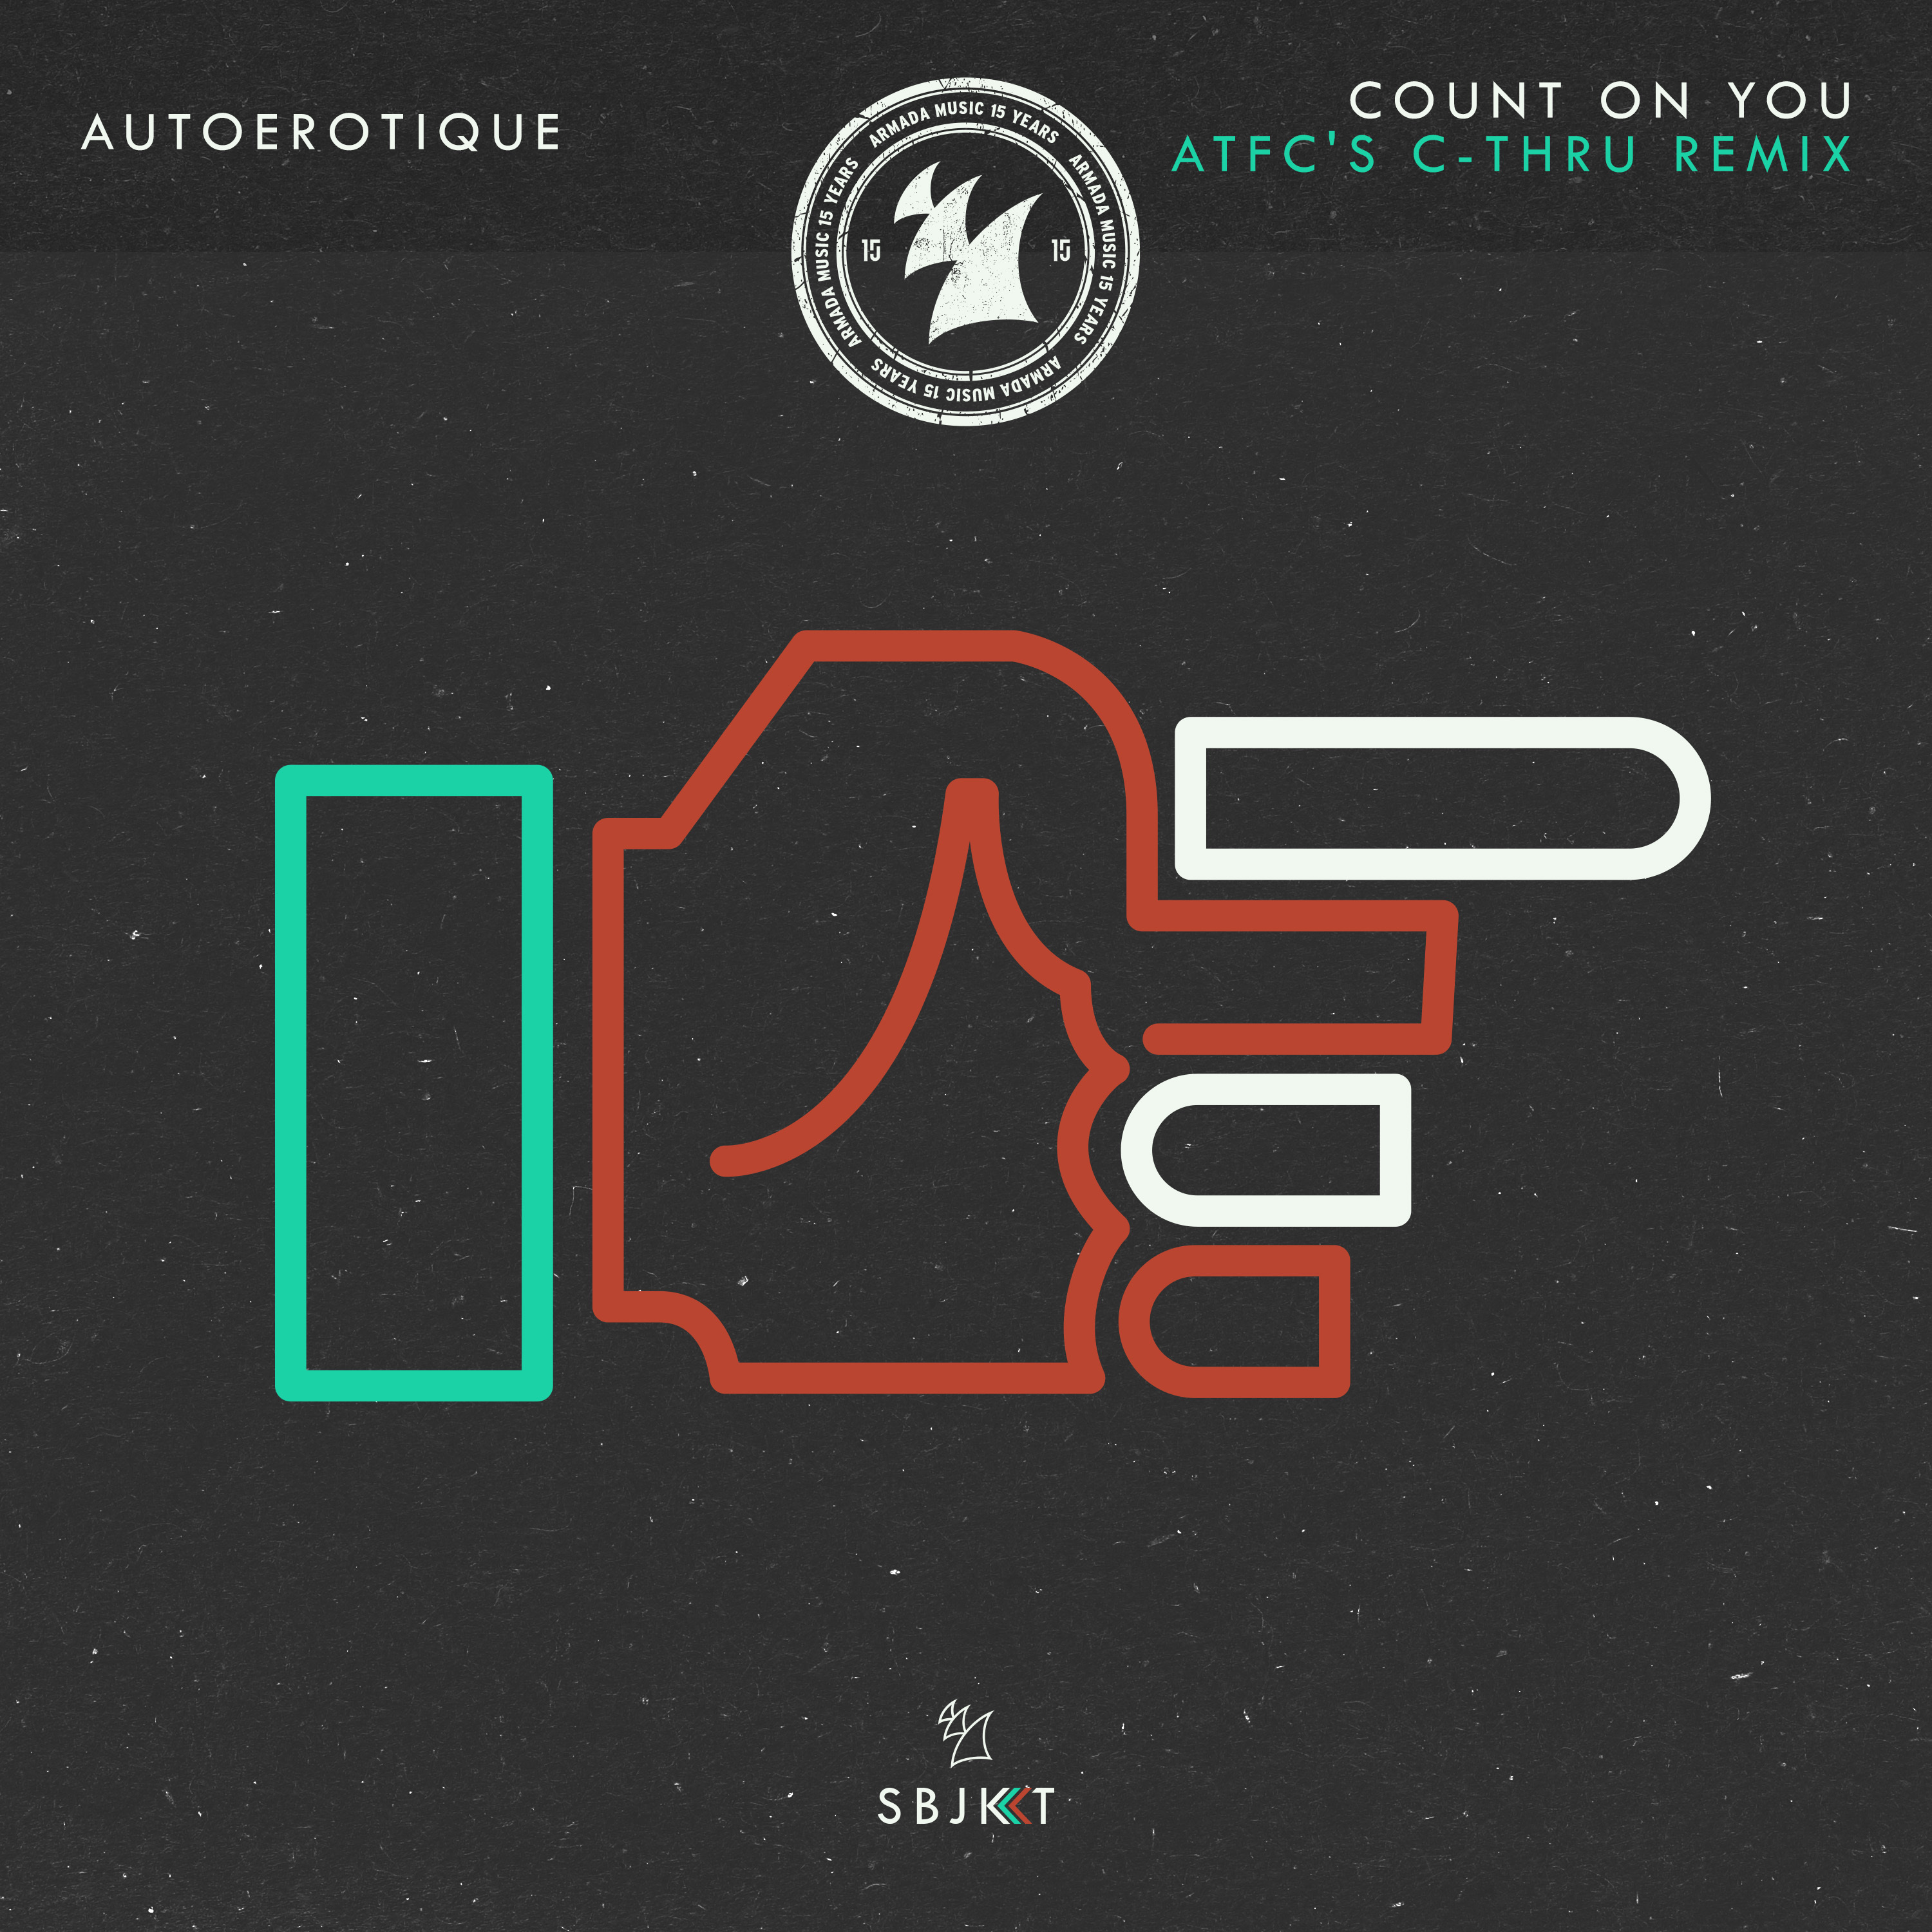 Count On You (ATFC's C-thru Remix)